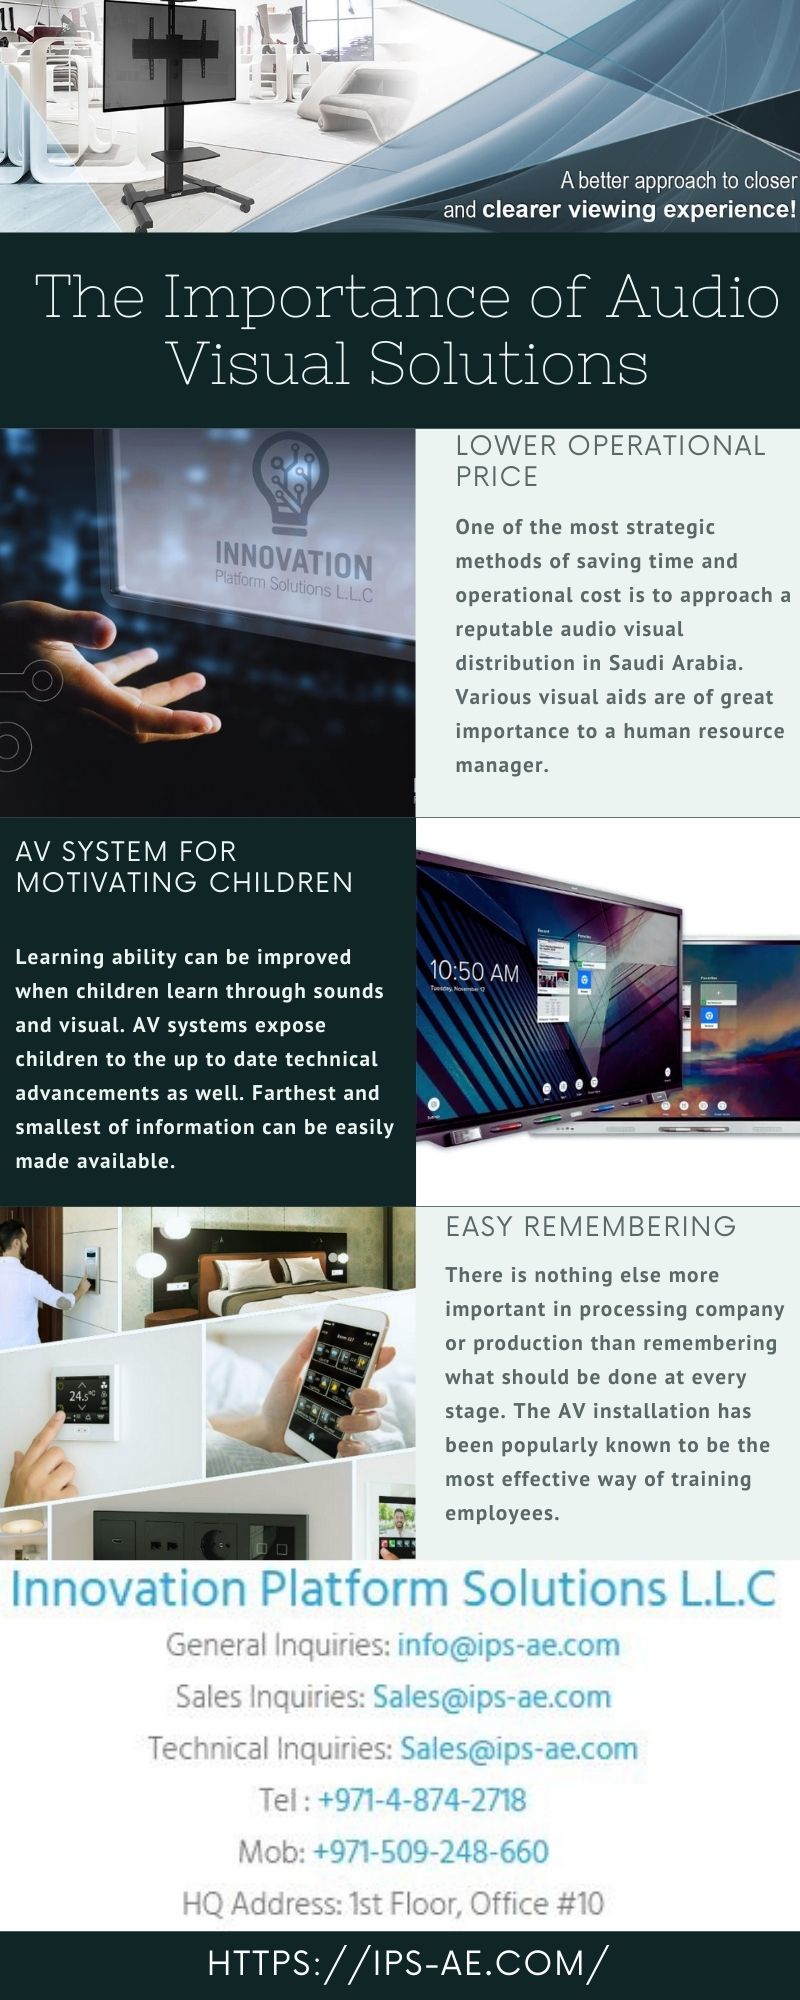 The Importance of Audio Visual Solutions.jpg  by innovationplatform